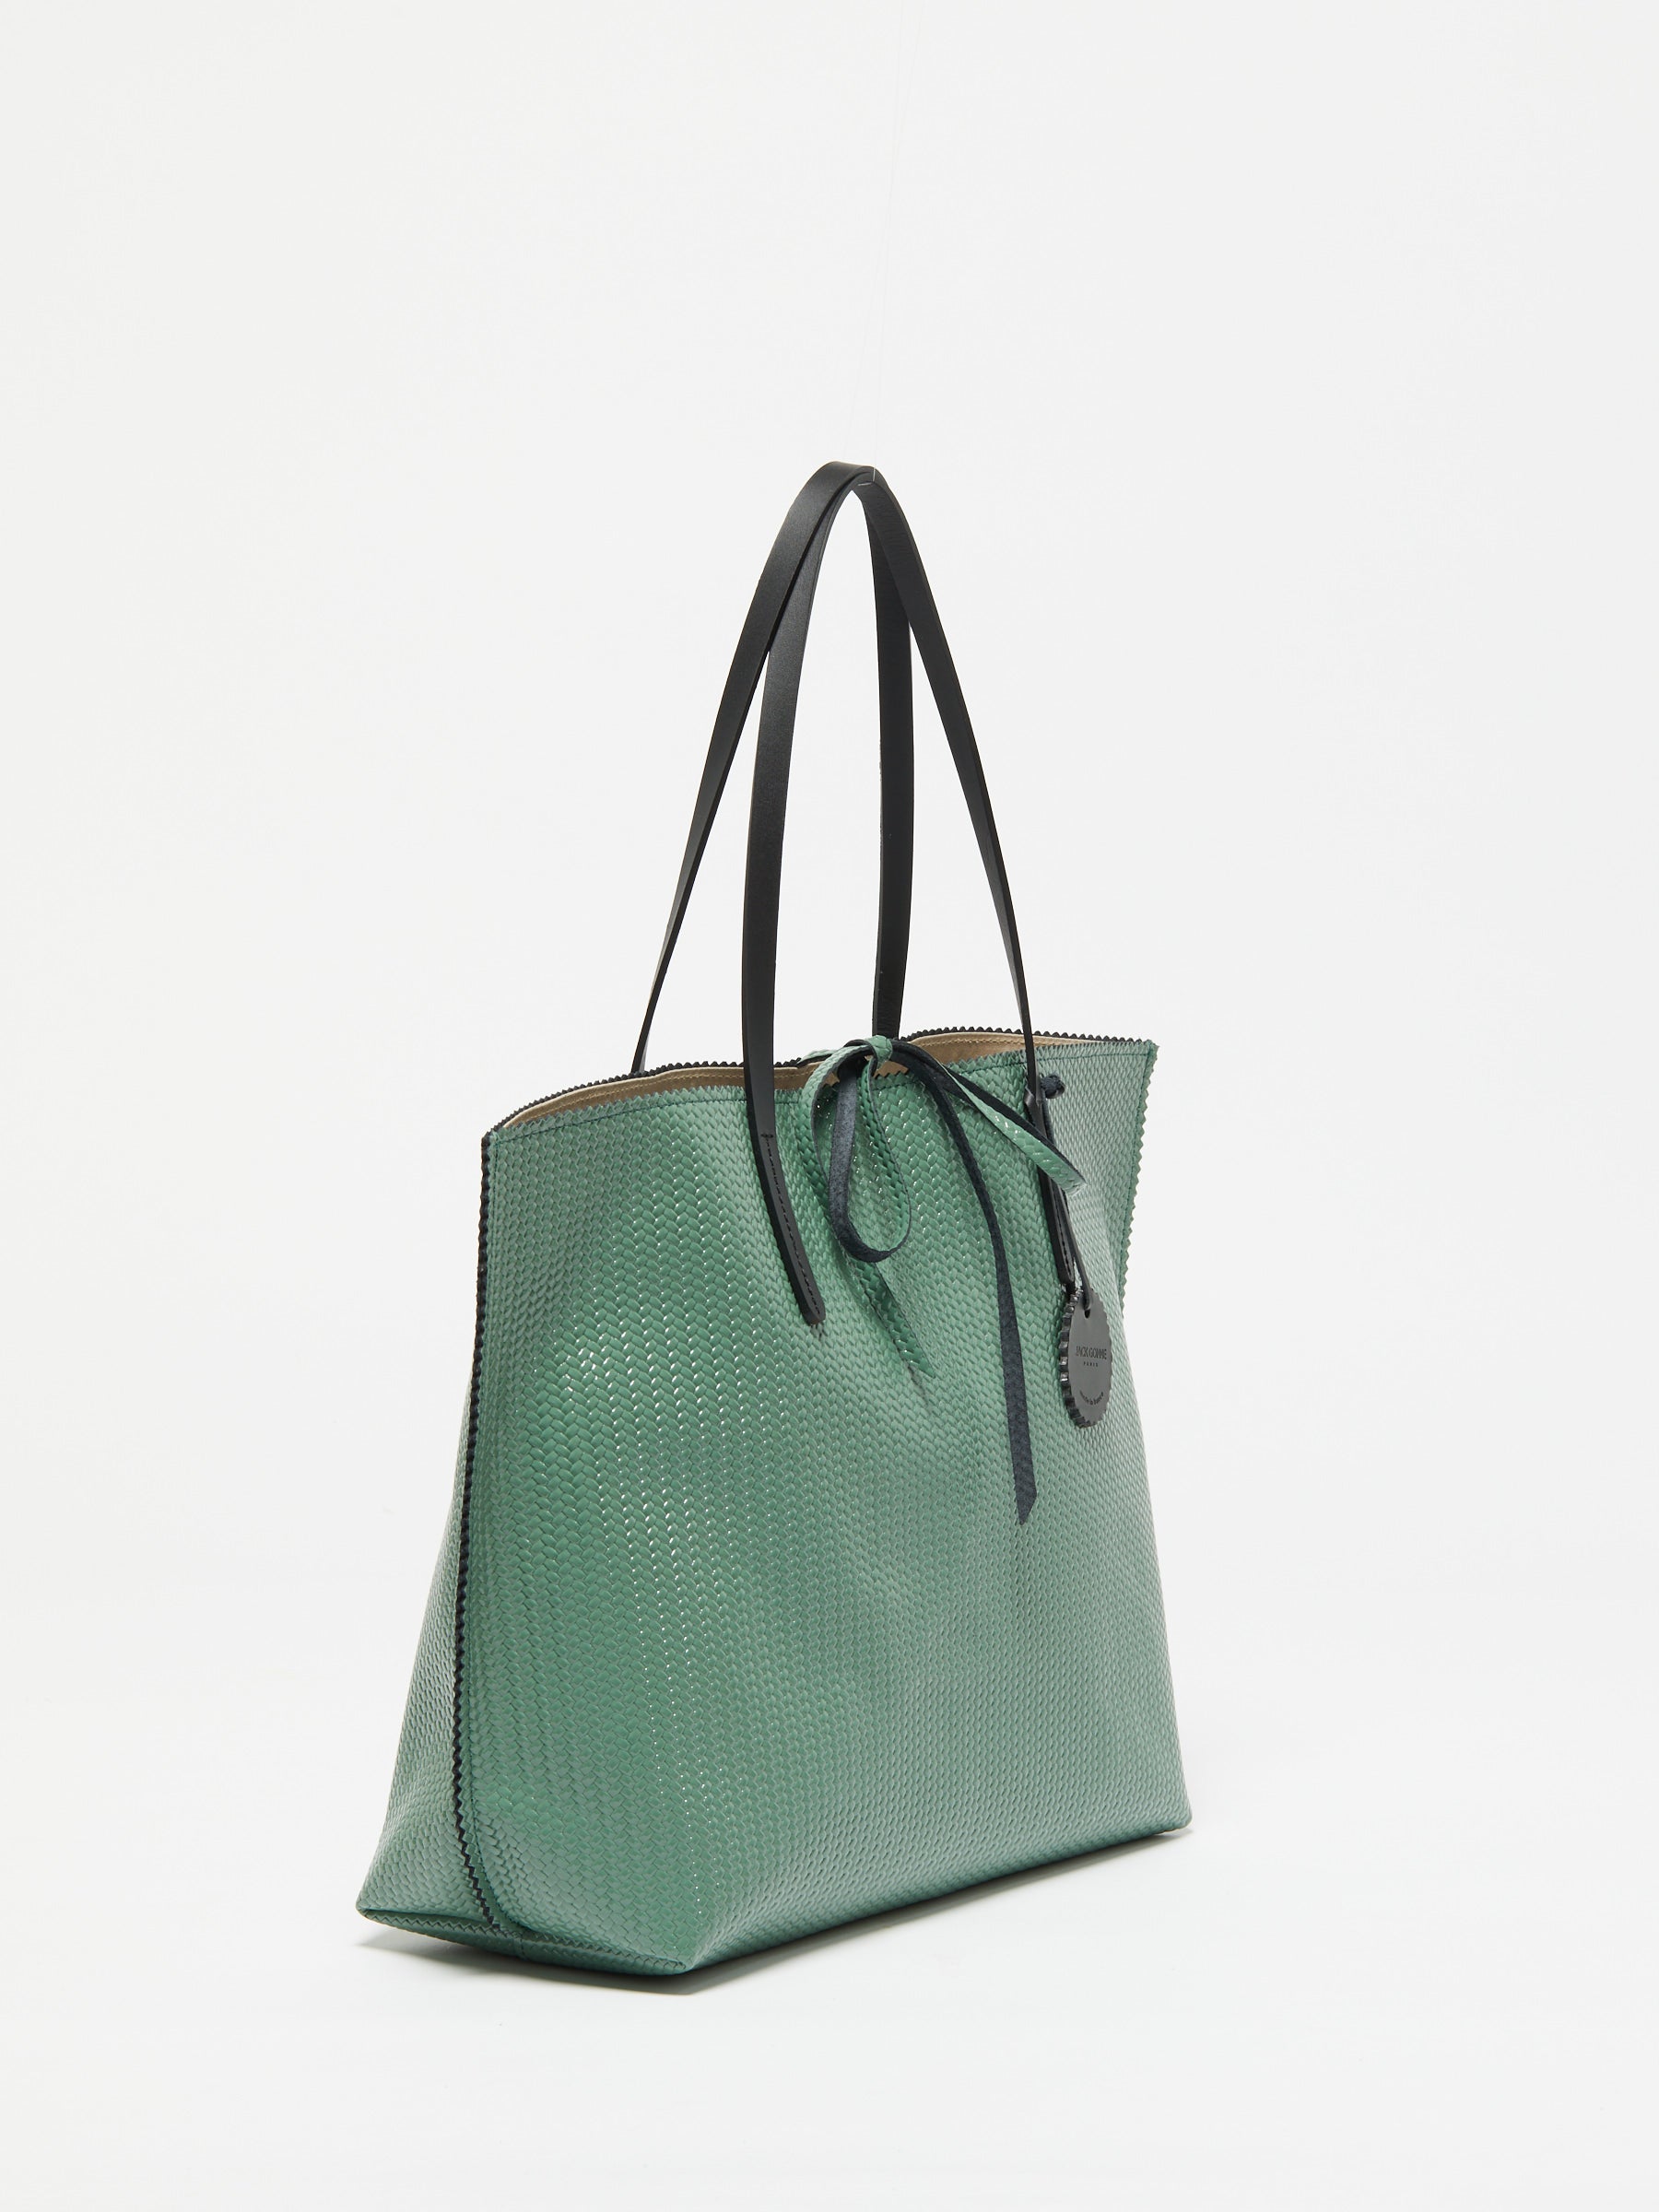 WOVEN LEATHER TOTE BAG